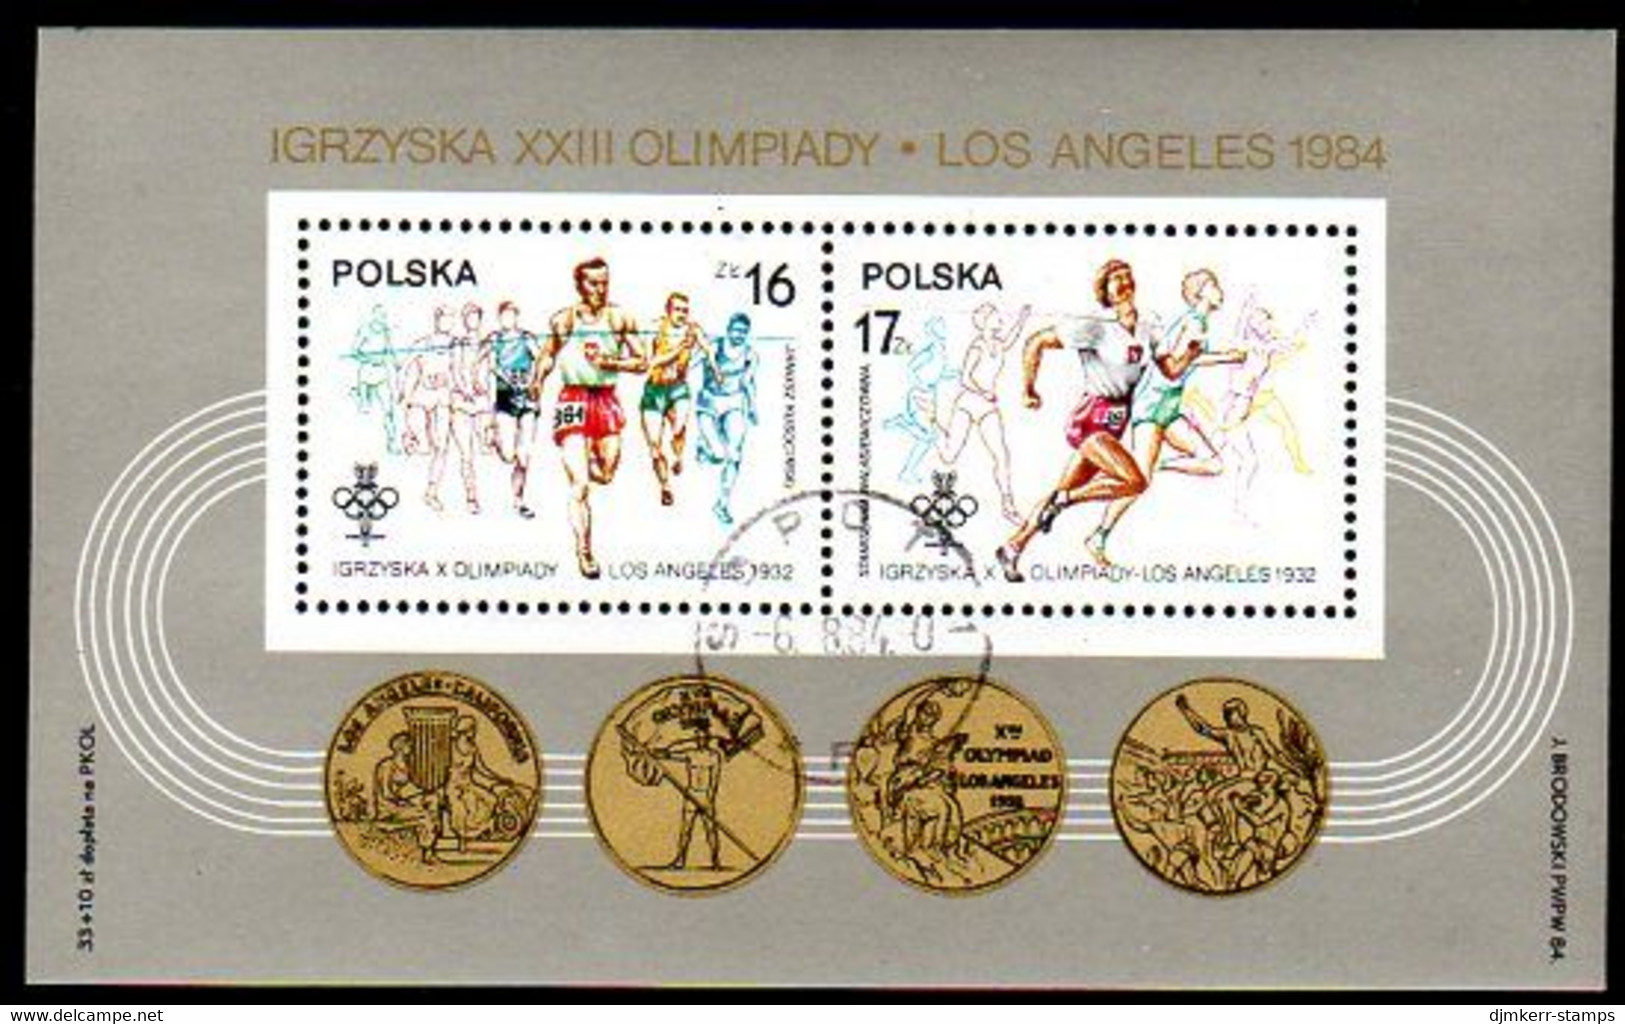 POLAND 1984 Olympic Games Block Used.  Michel Block 94 - Usados